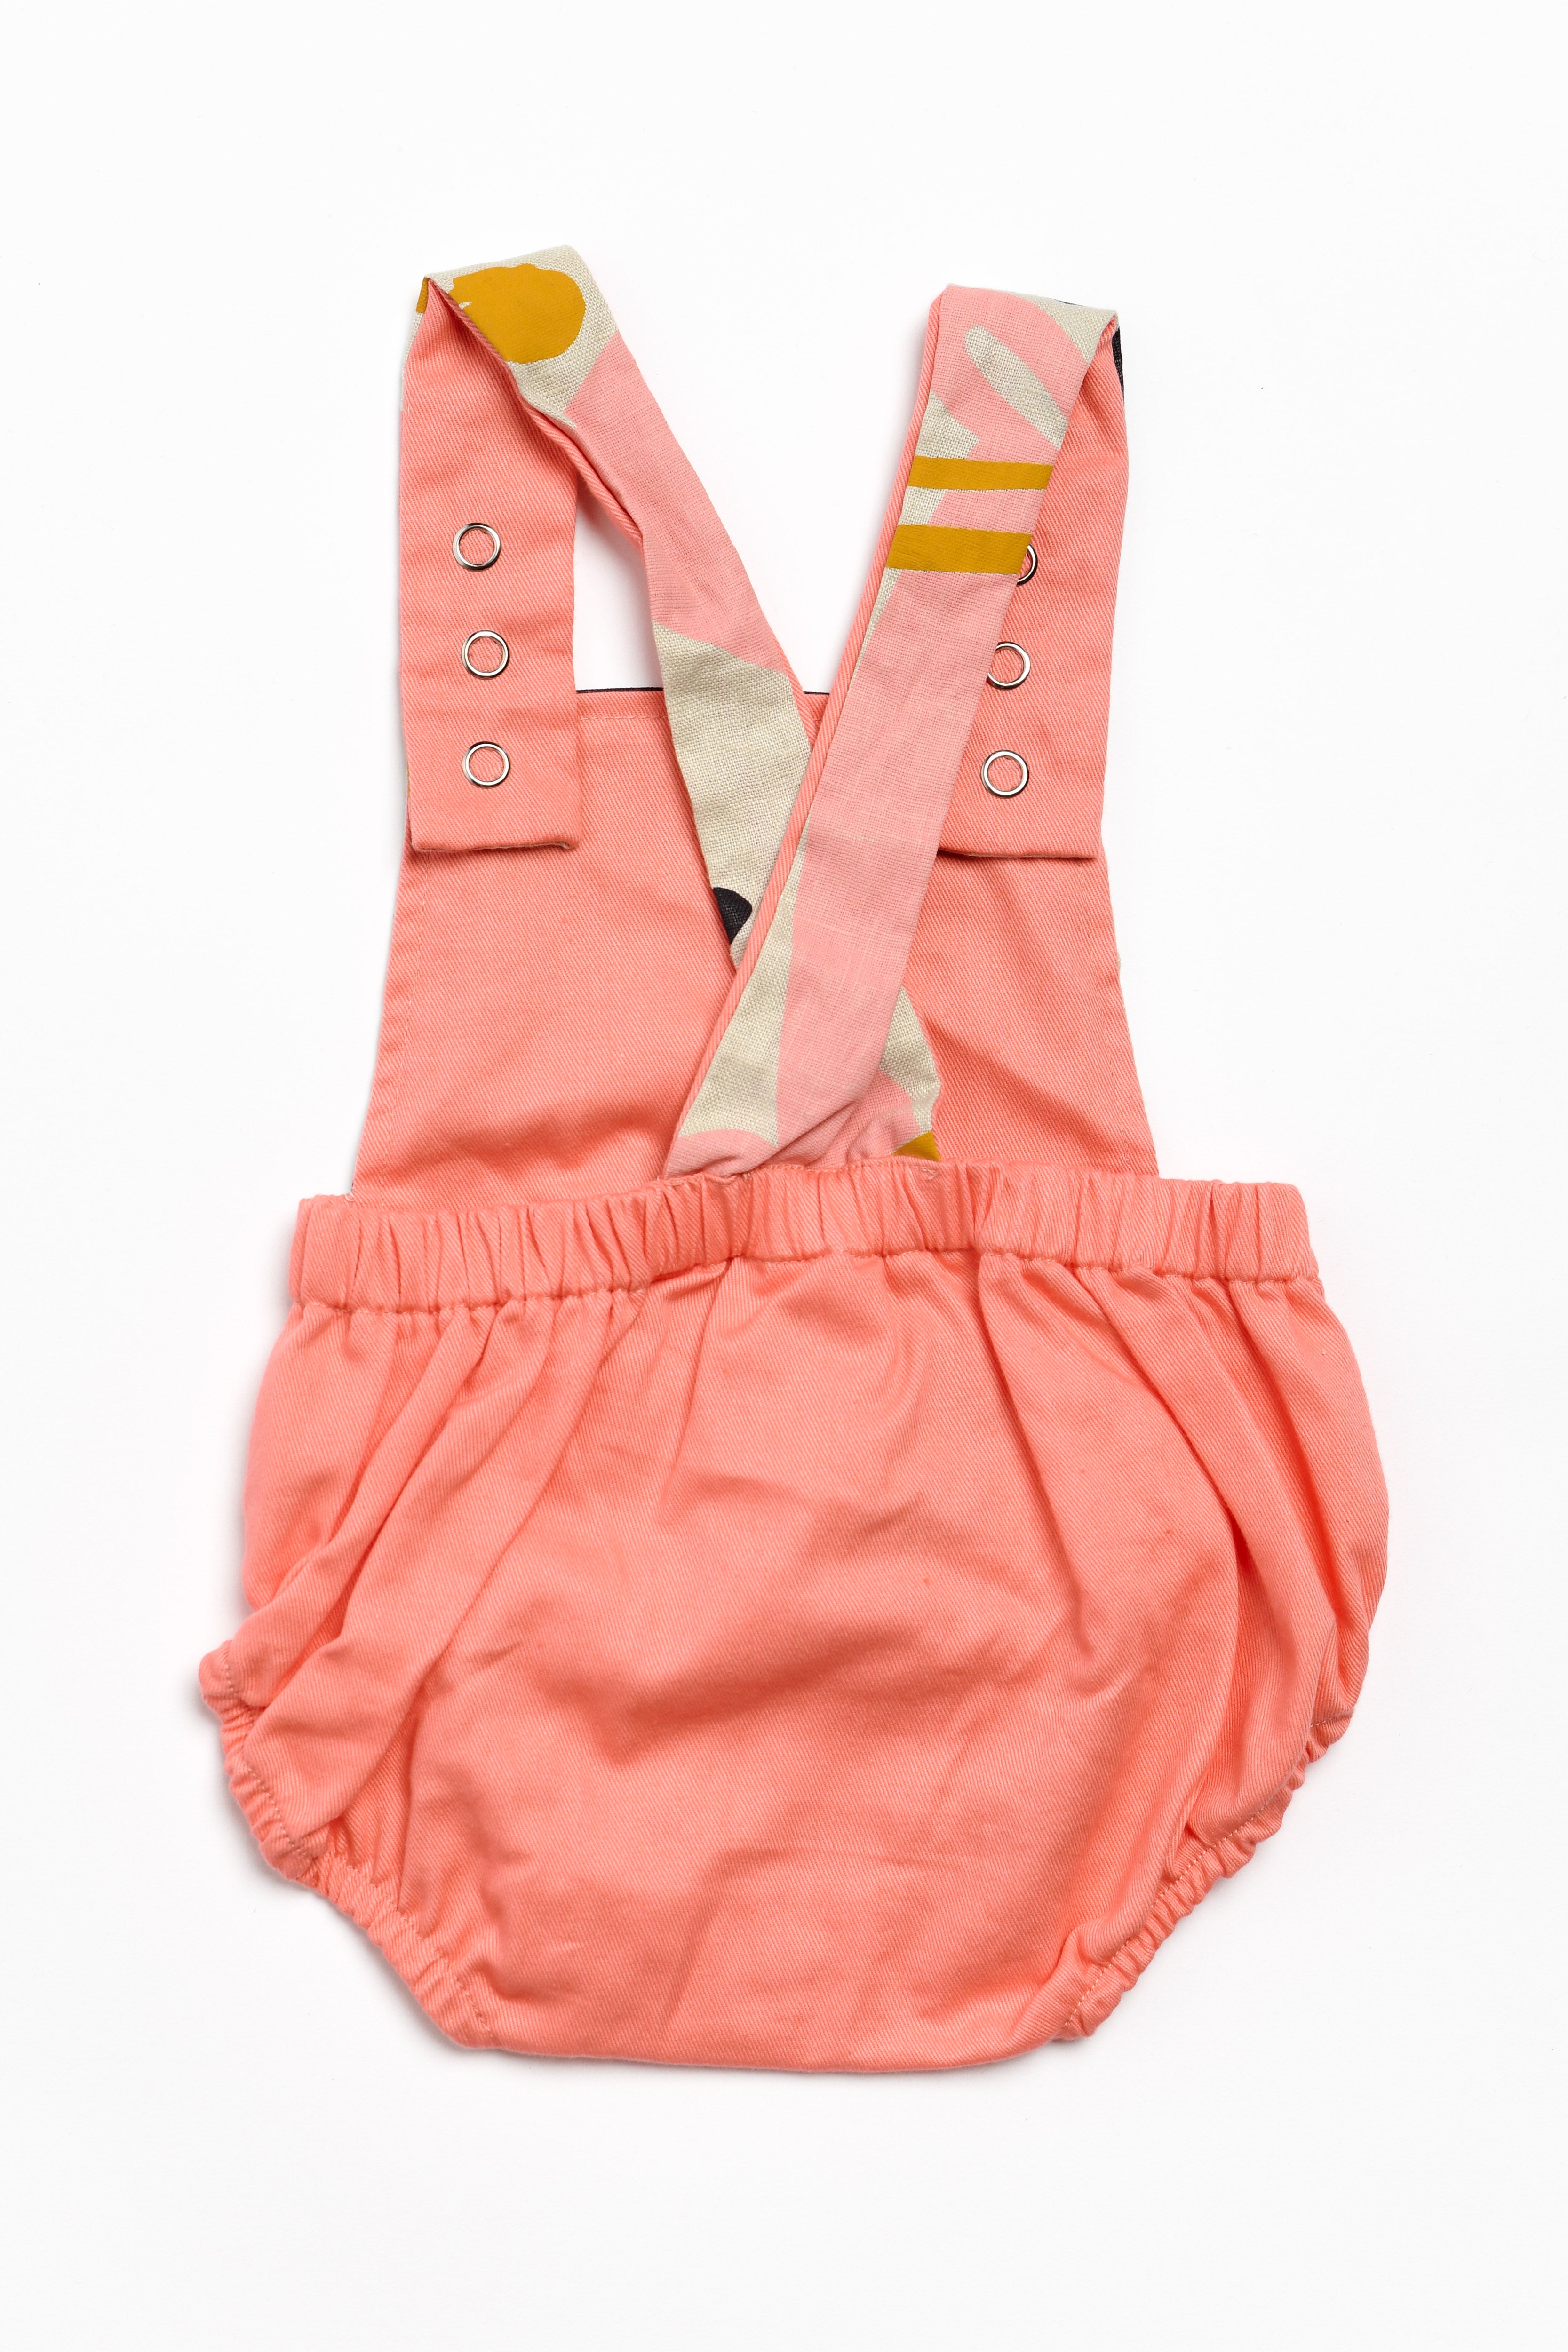 Baby Romper - Hunting Tools